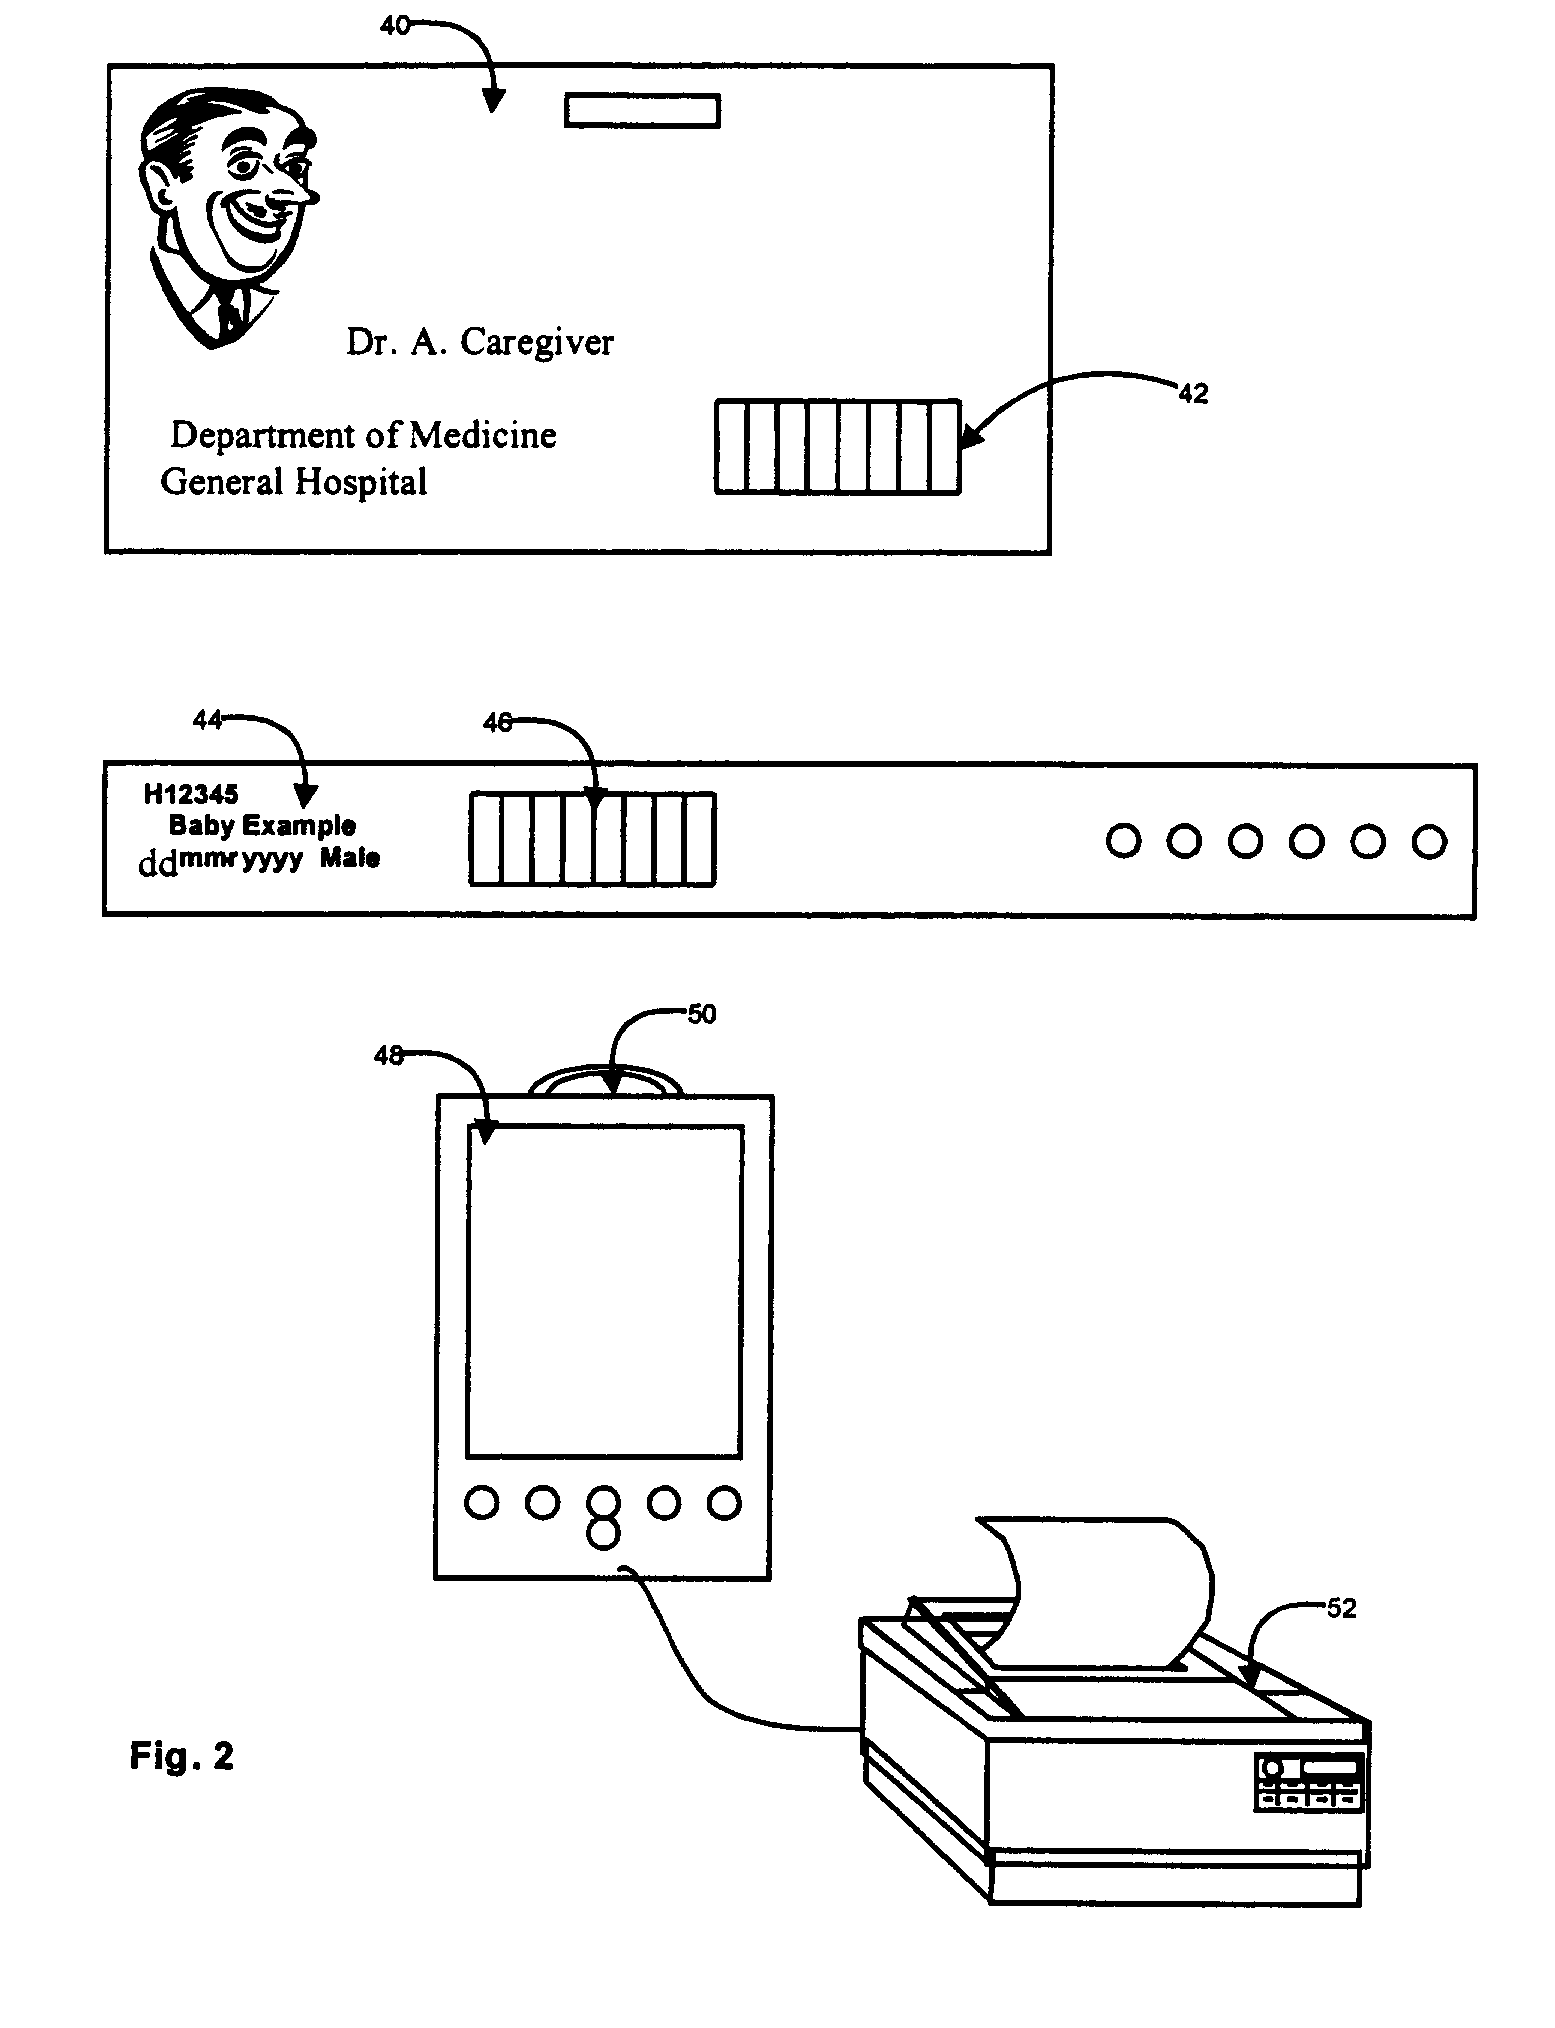 Apparatus and method for administration of mother's milk